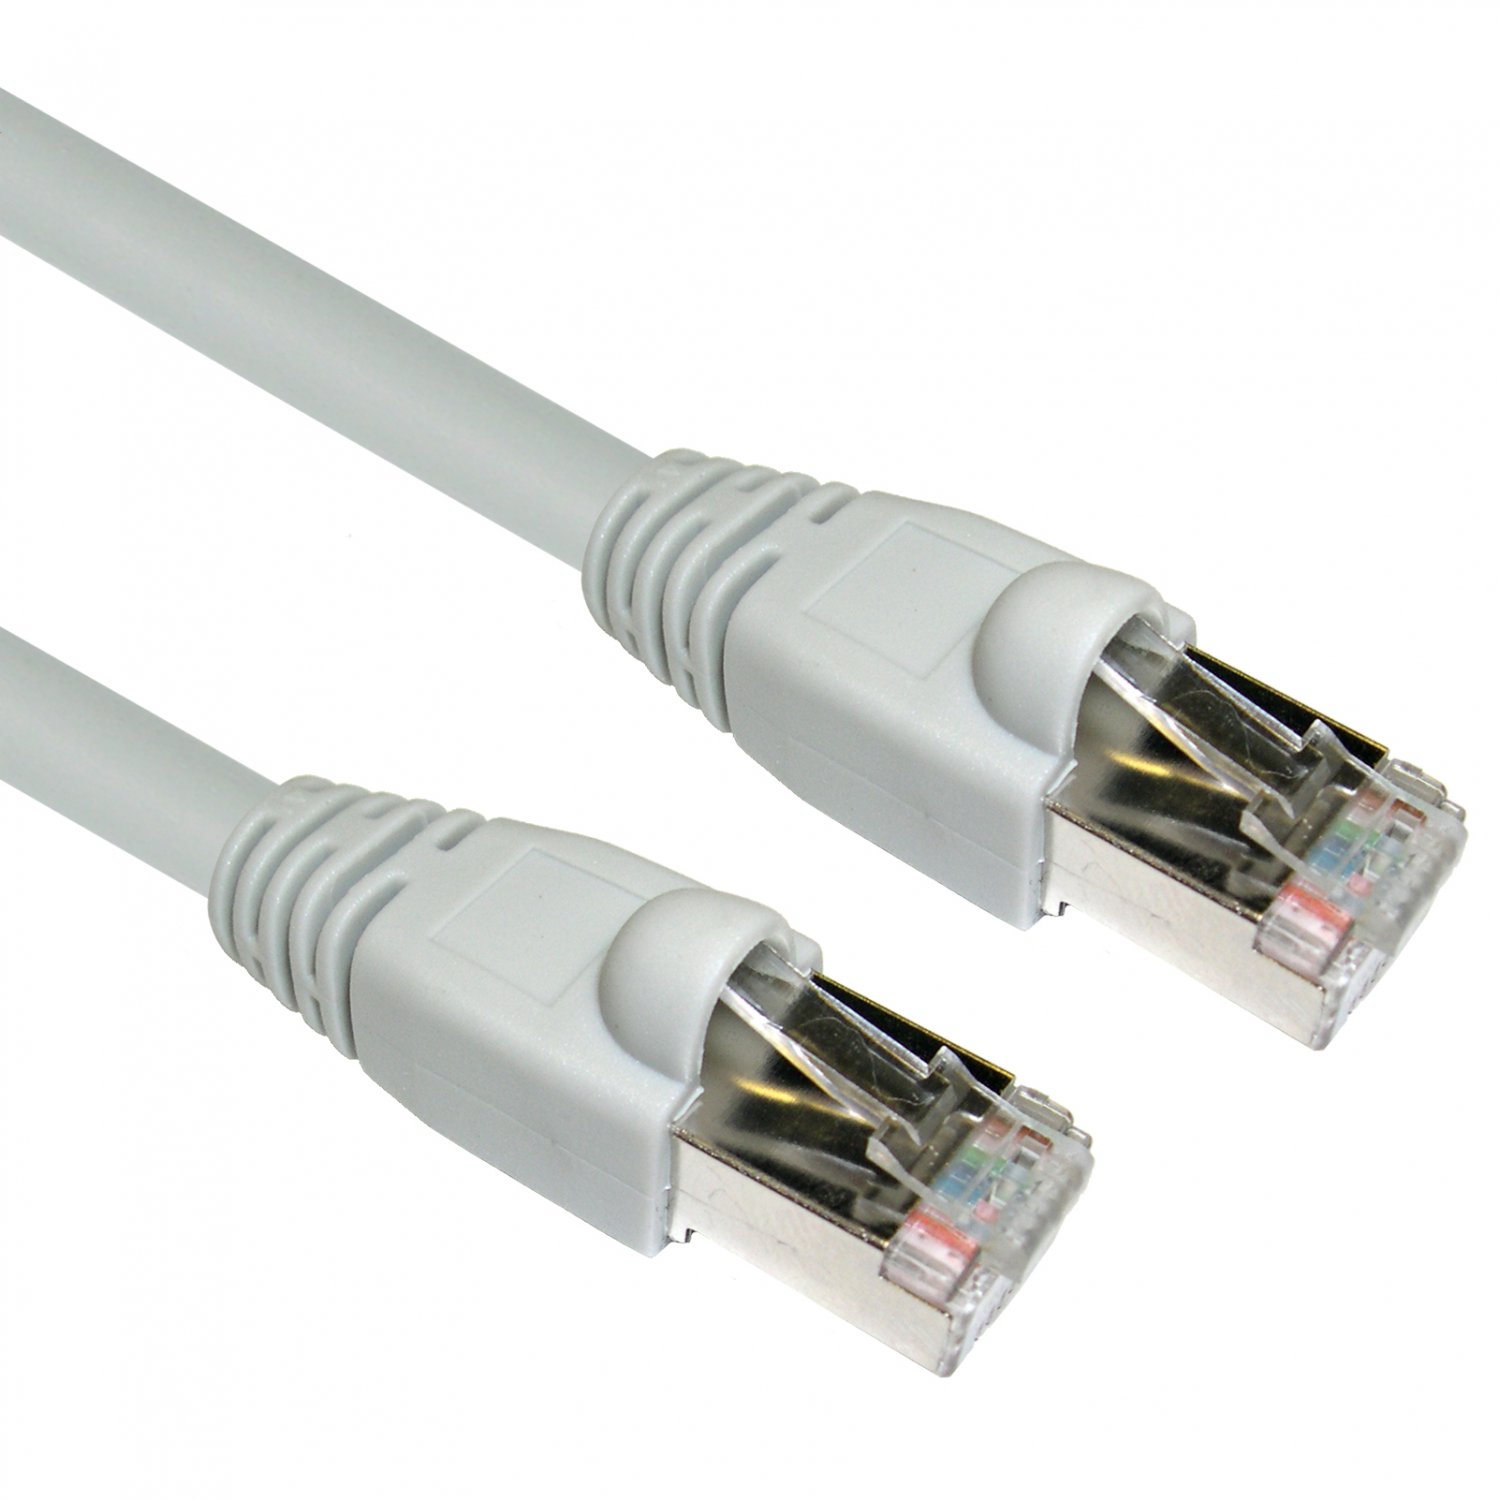 13X6-52135 Shielded Cat6a Gray Ethernet Patch Cable, Snagless/Molded Boot, 500 MHz, 35 foot